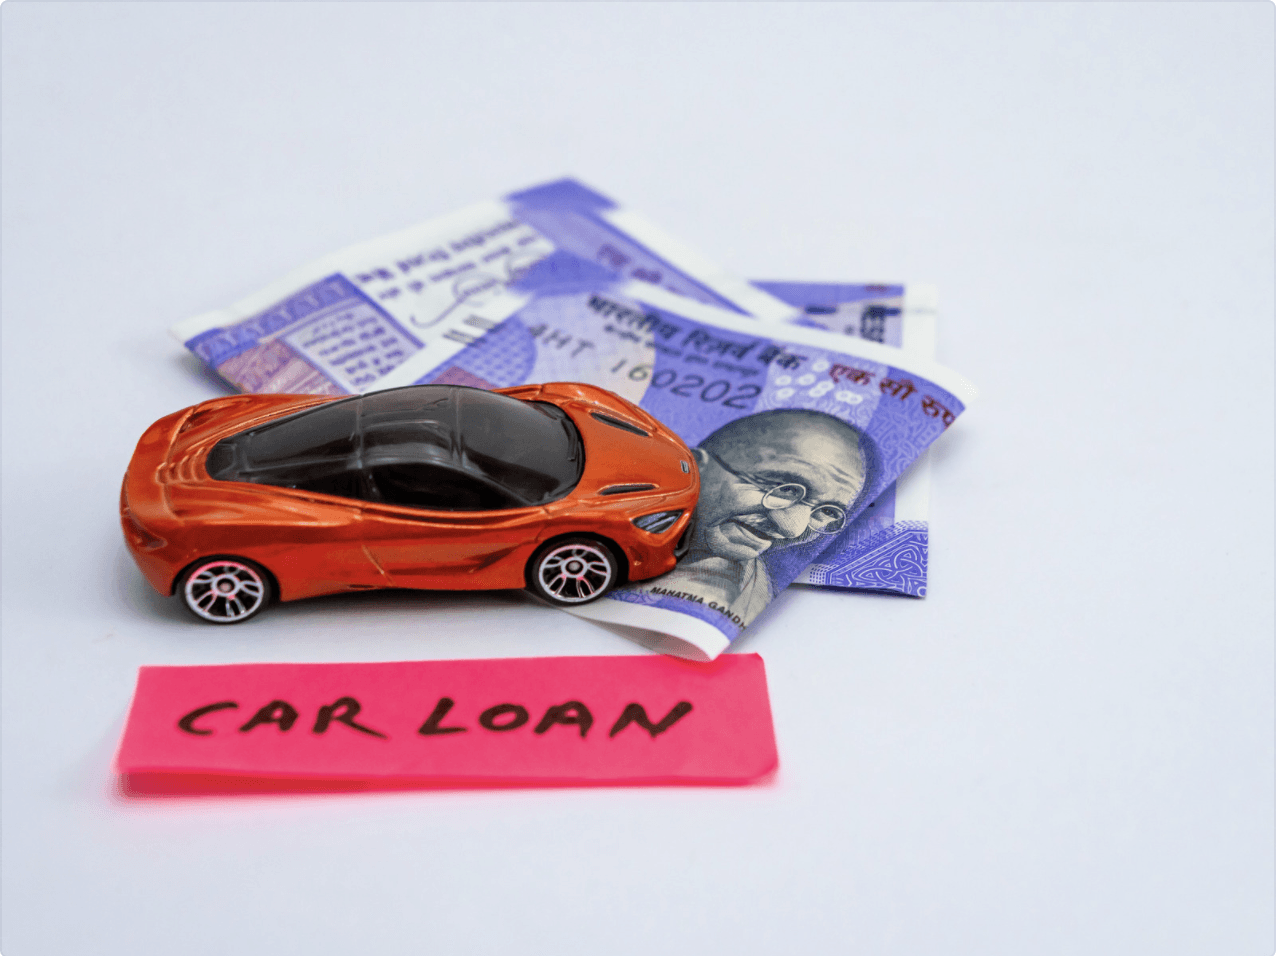 Taking a Car Loan? Common Mistakes to Avoid